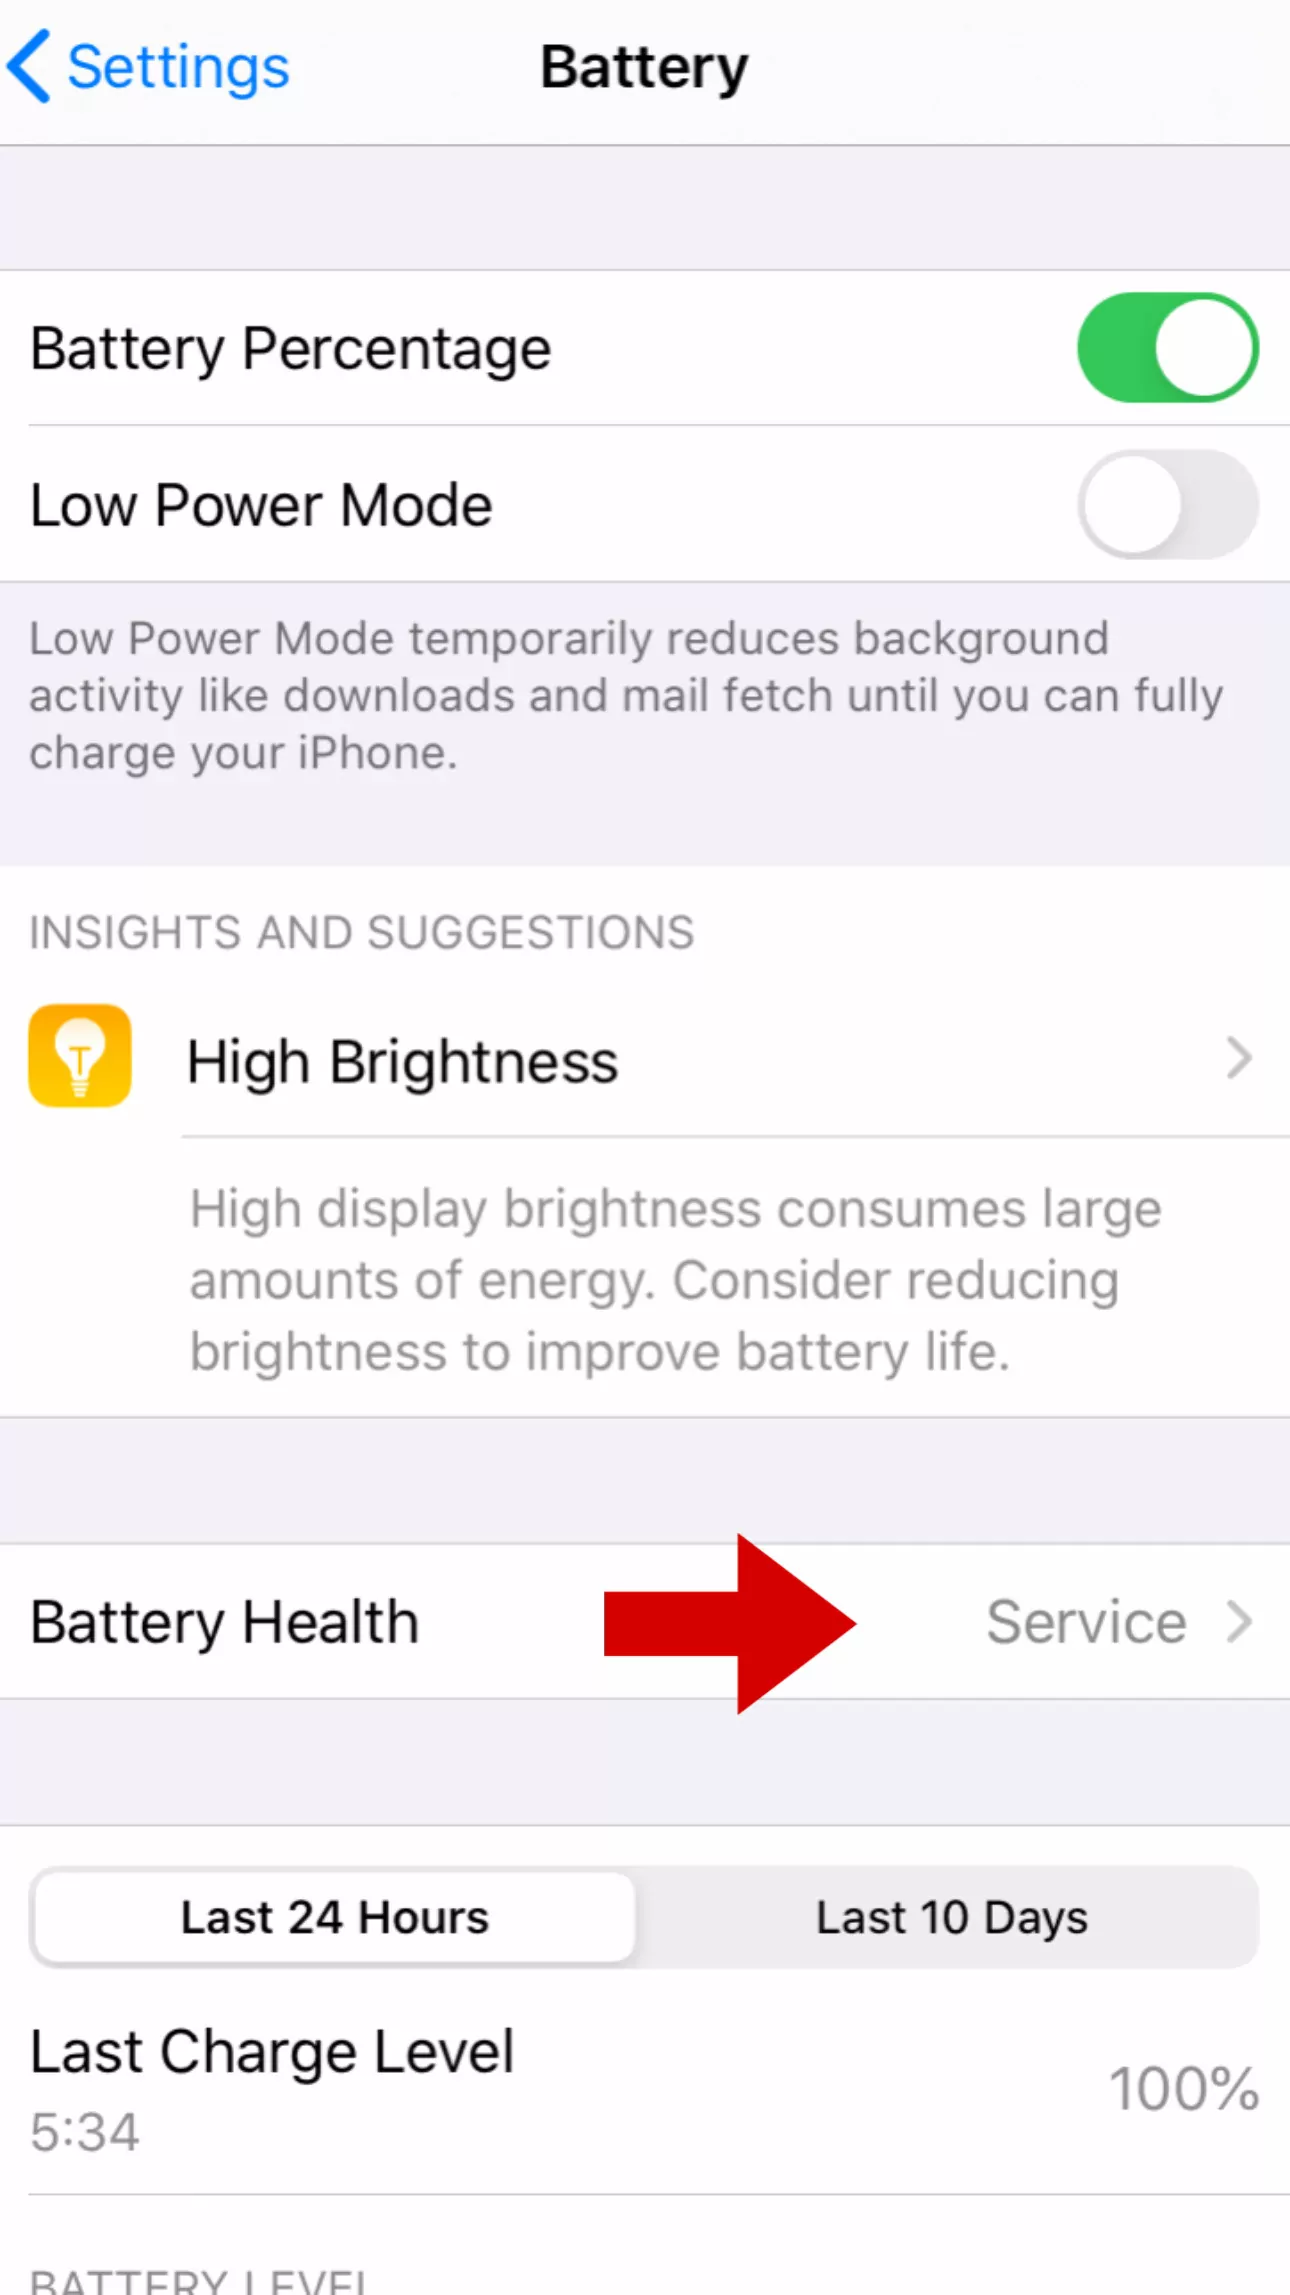 iPhone battery health "Service"